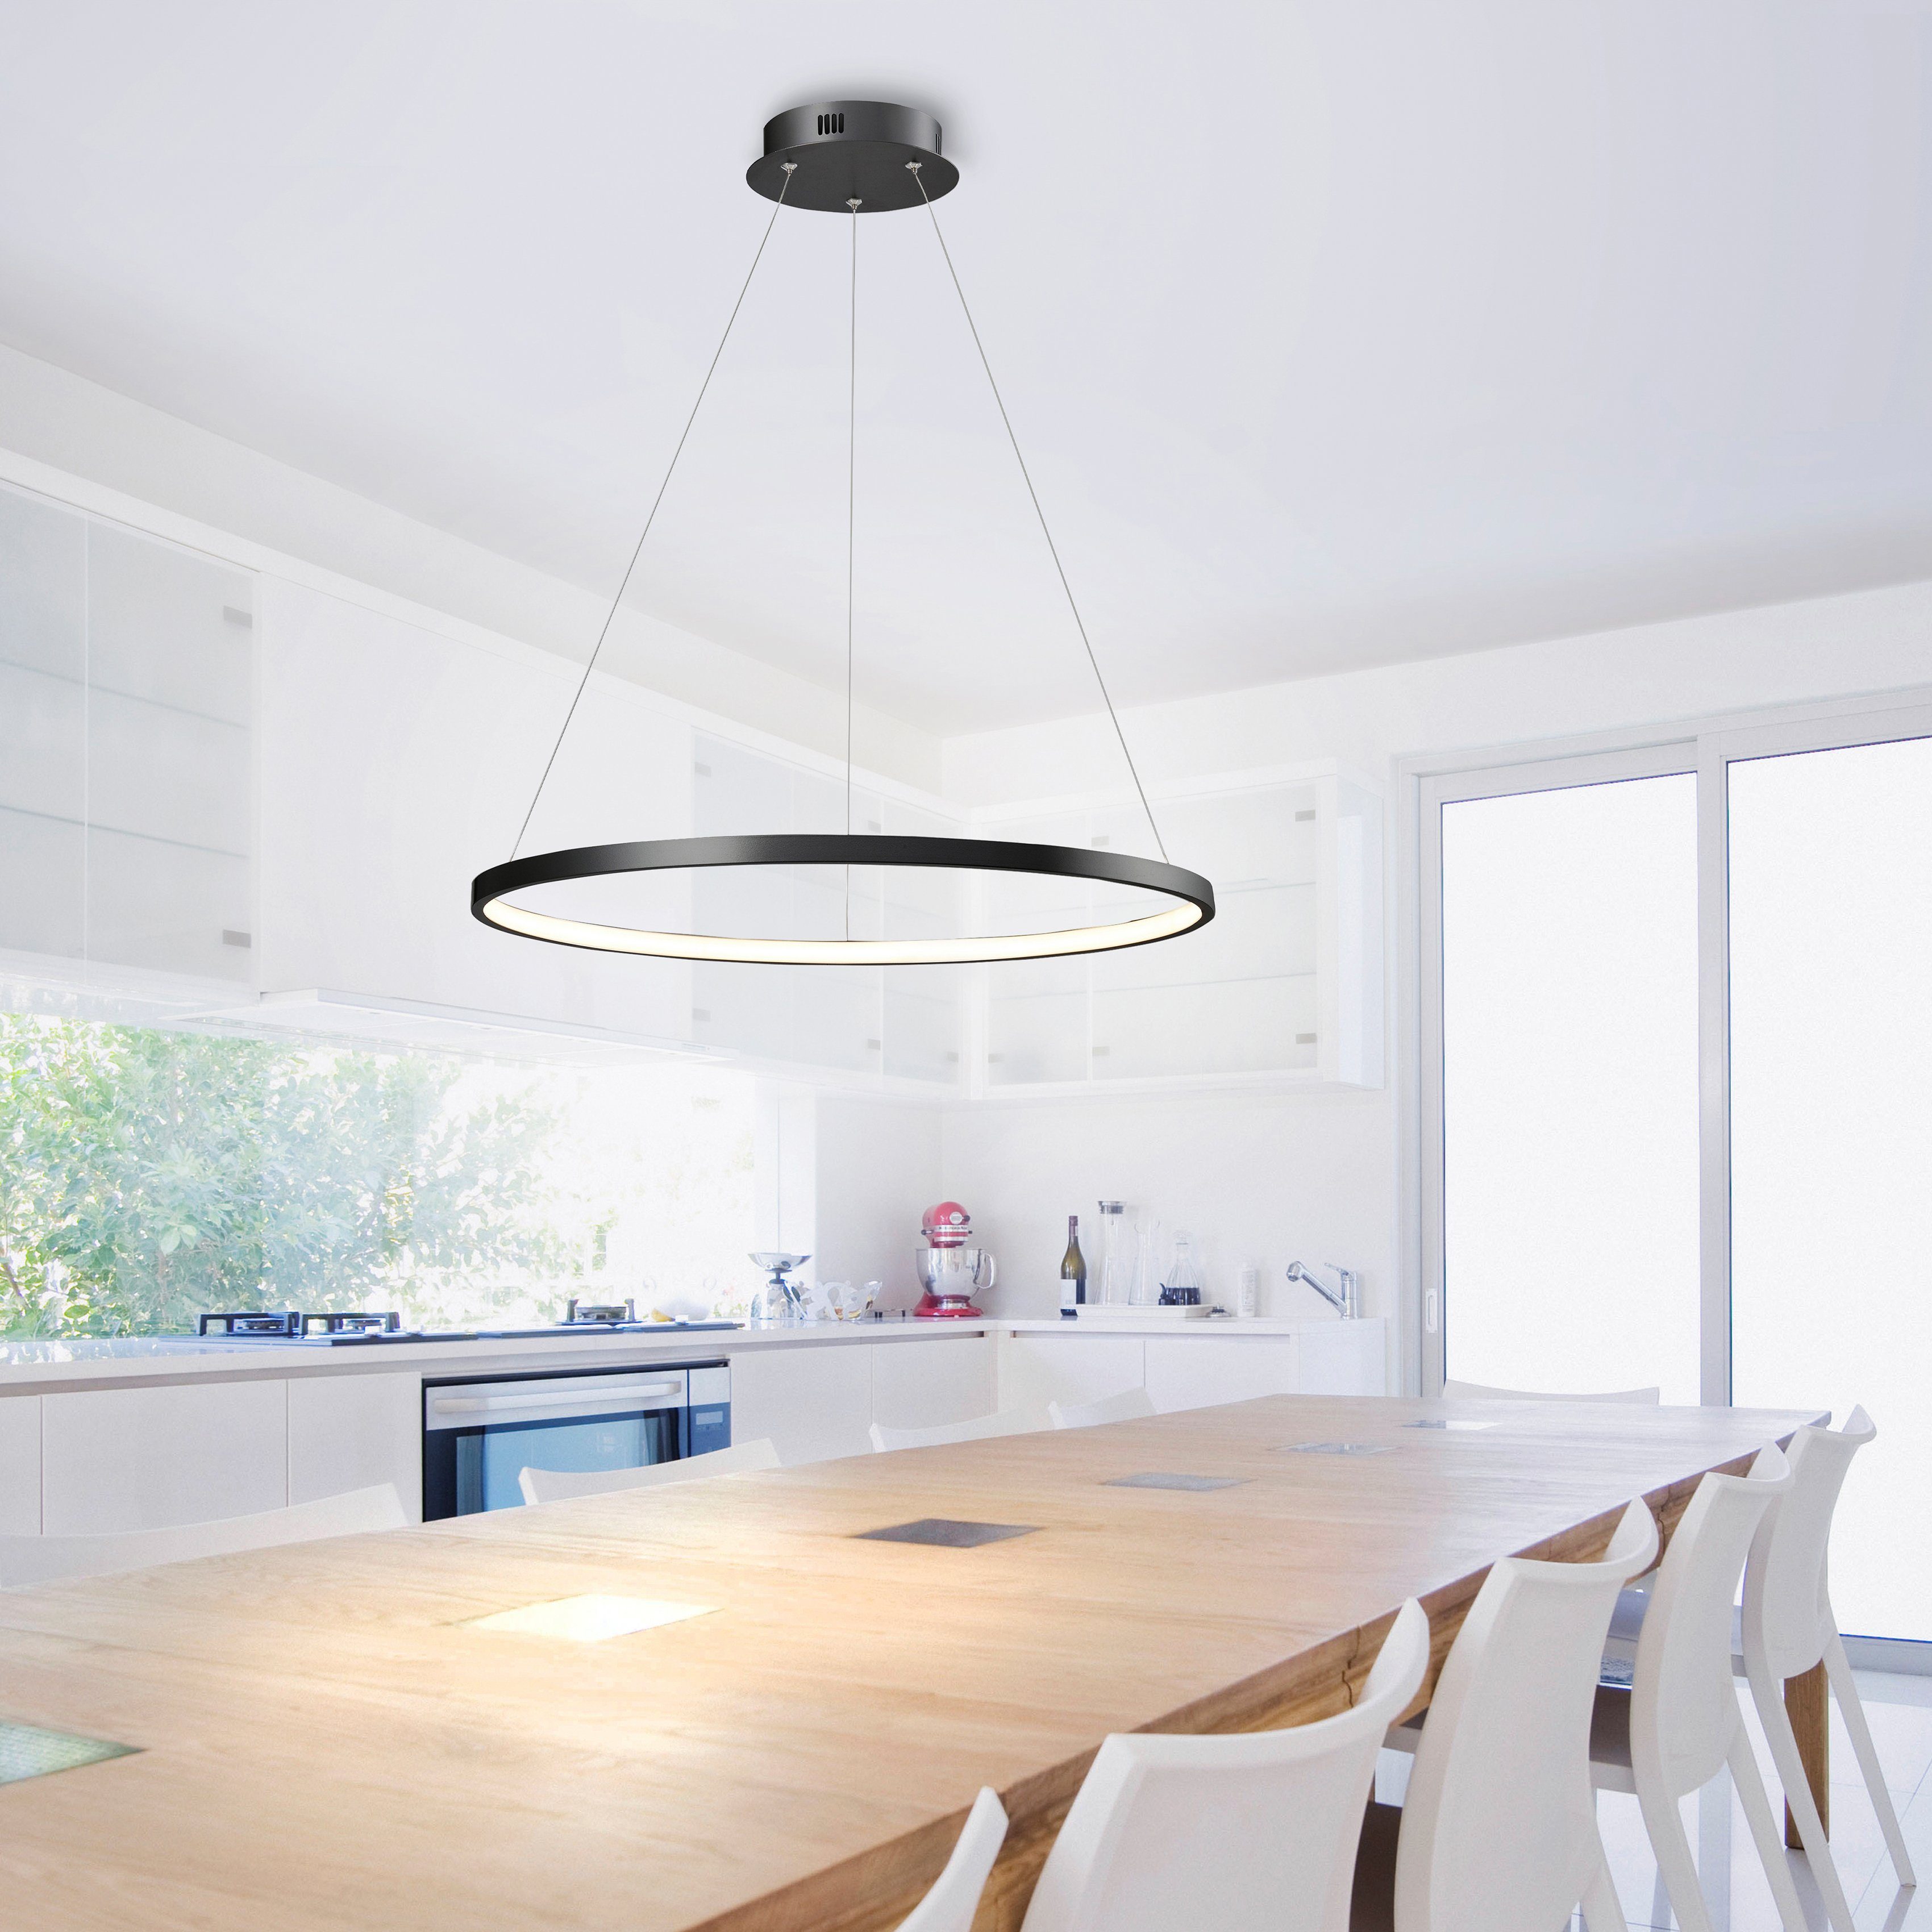 fest modern Hängelampe Warmweiß, Raylan, integriert, Places Style LED Ring LED LED of Pendelleuchte